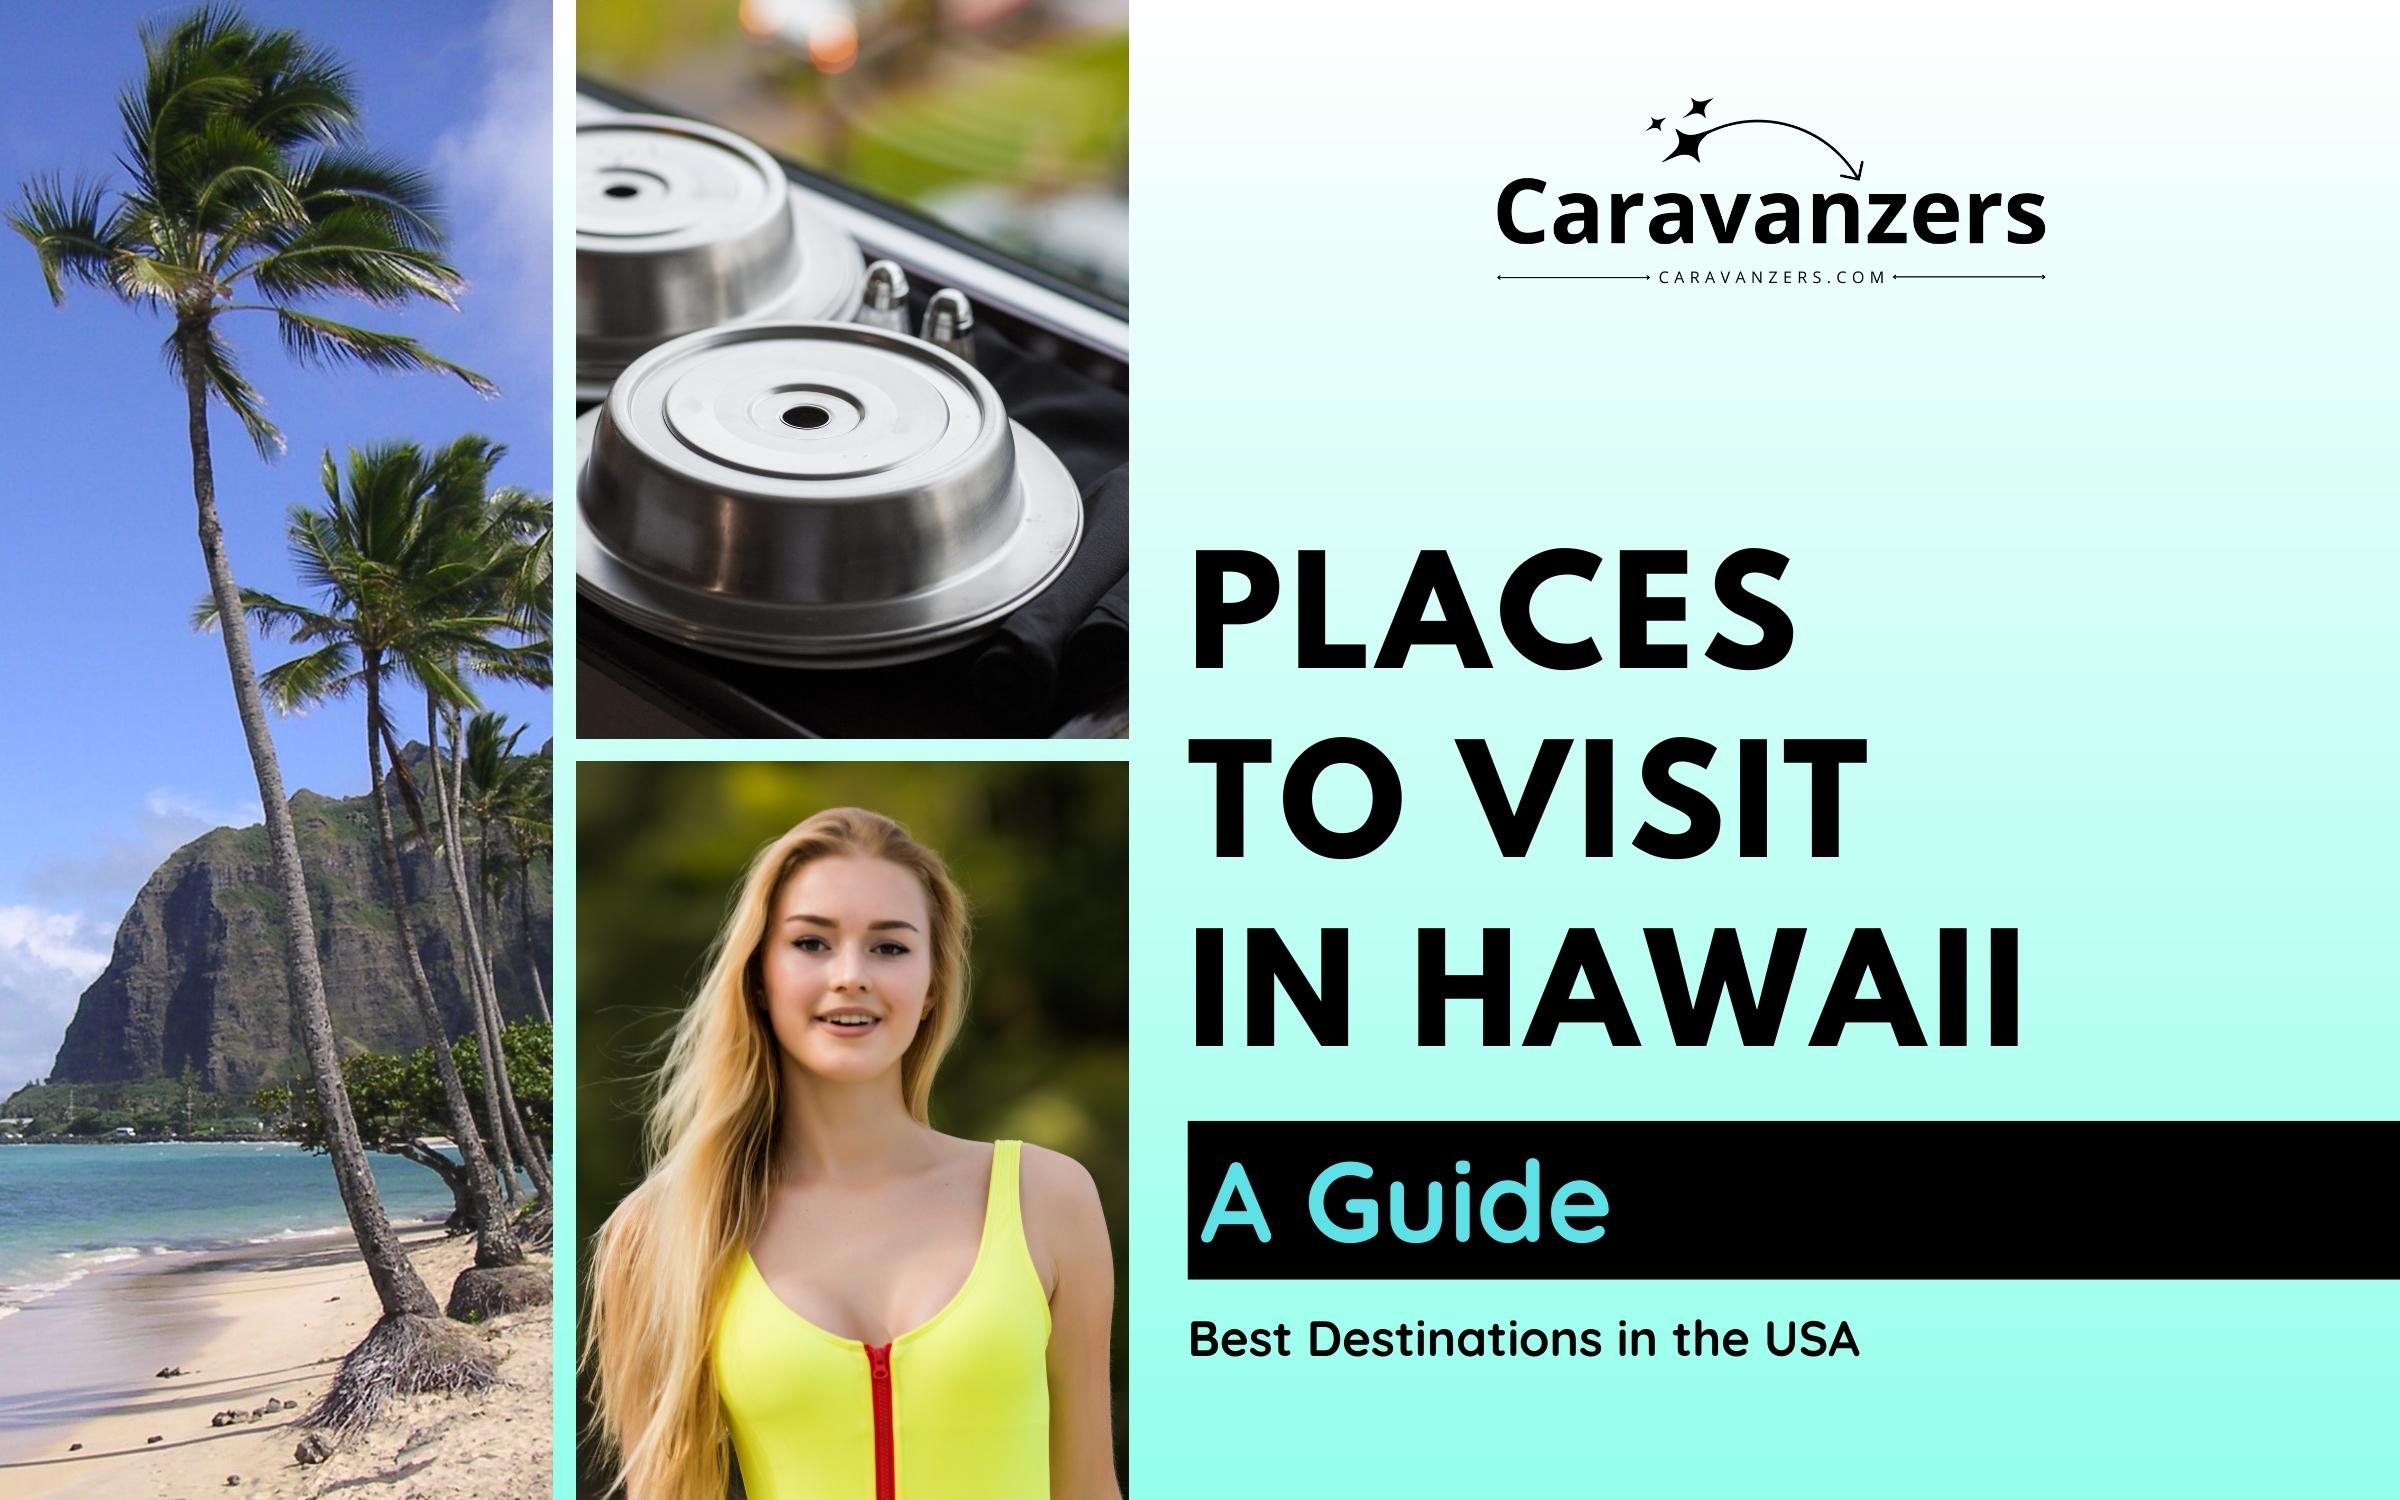 Places to Visit in Hawaii - The Most Beautiful State in the USA